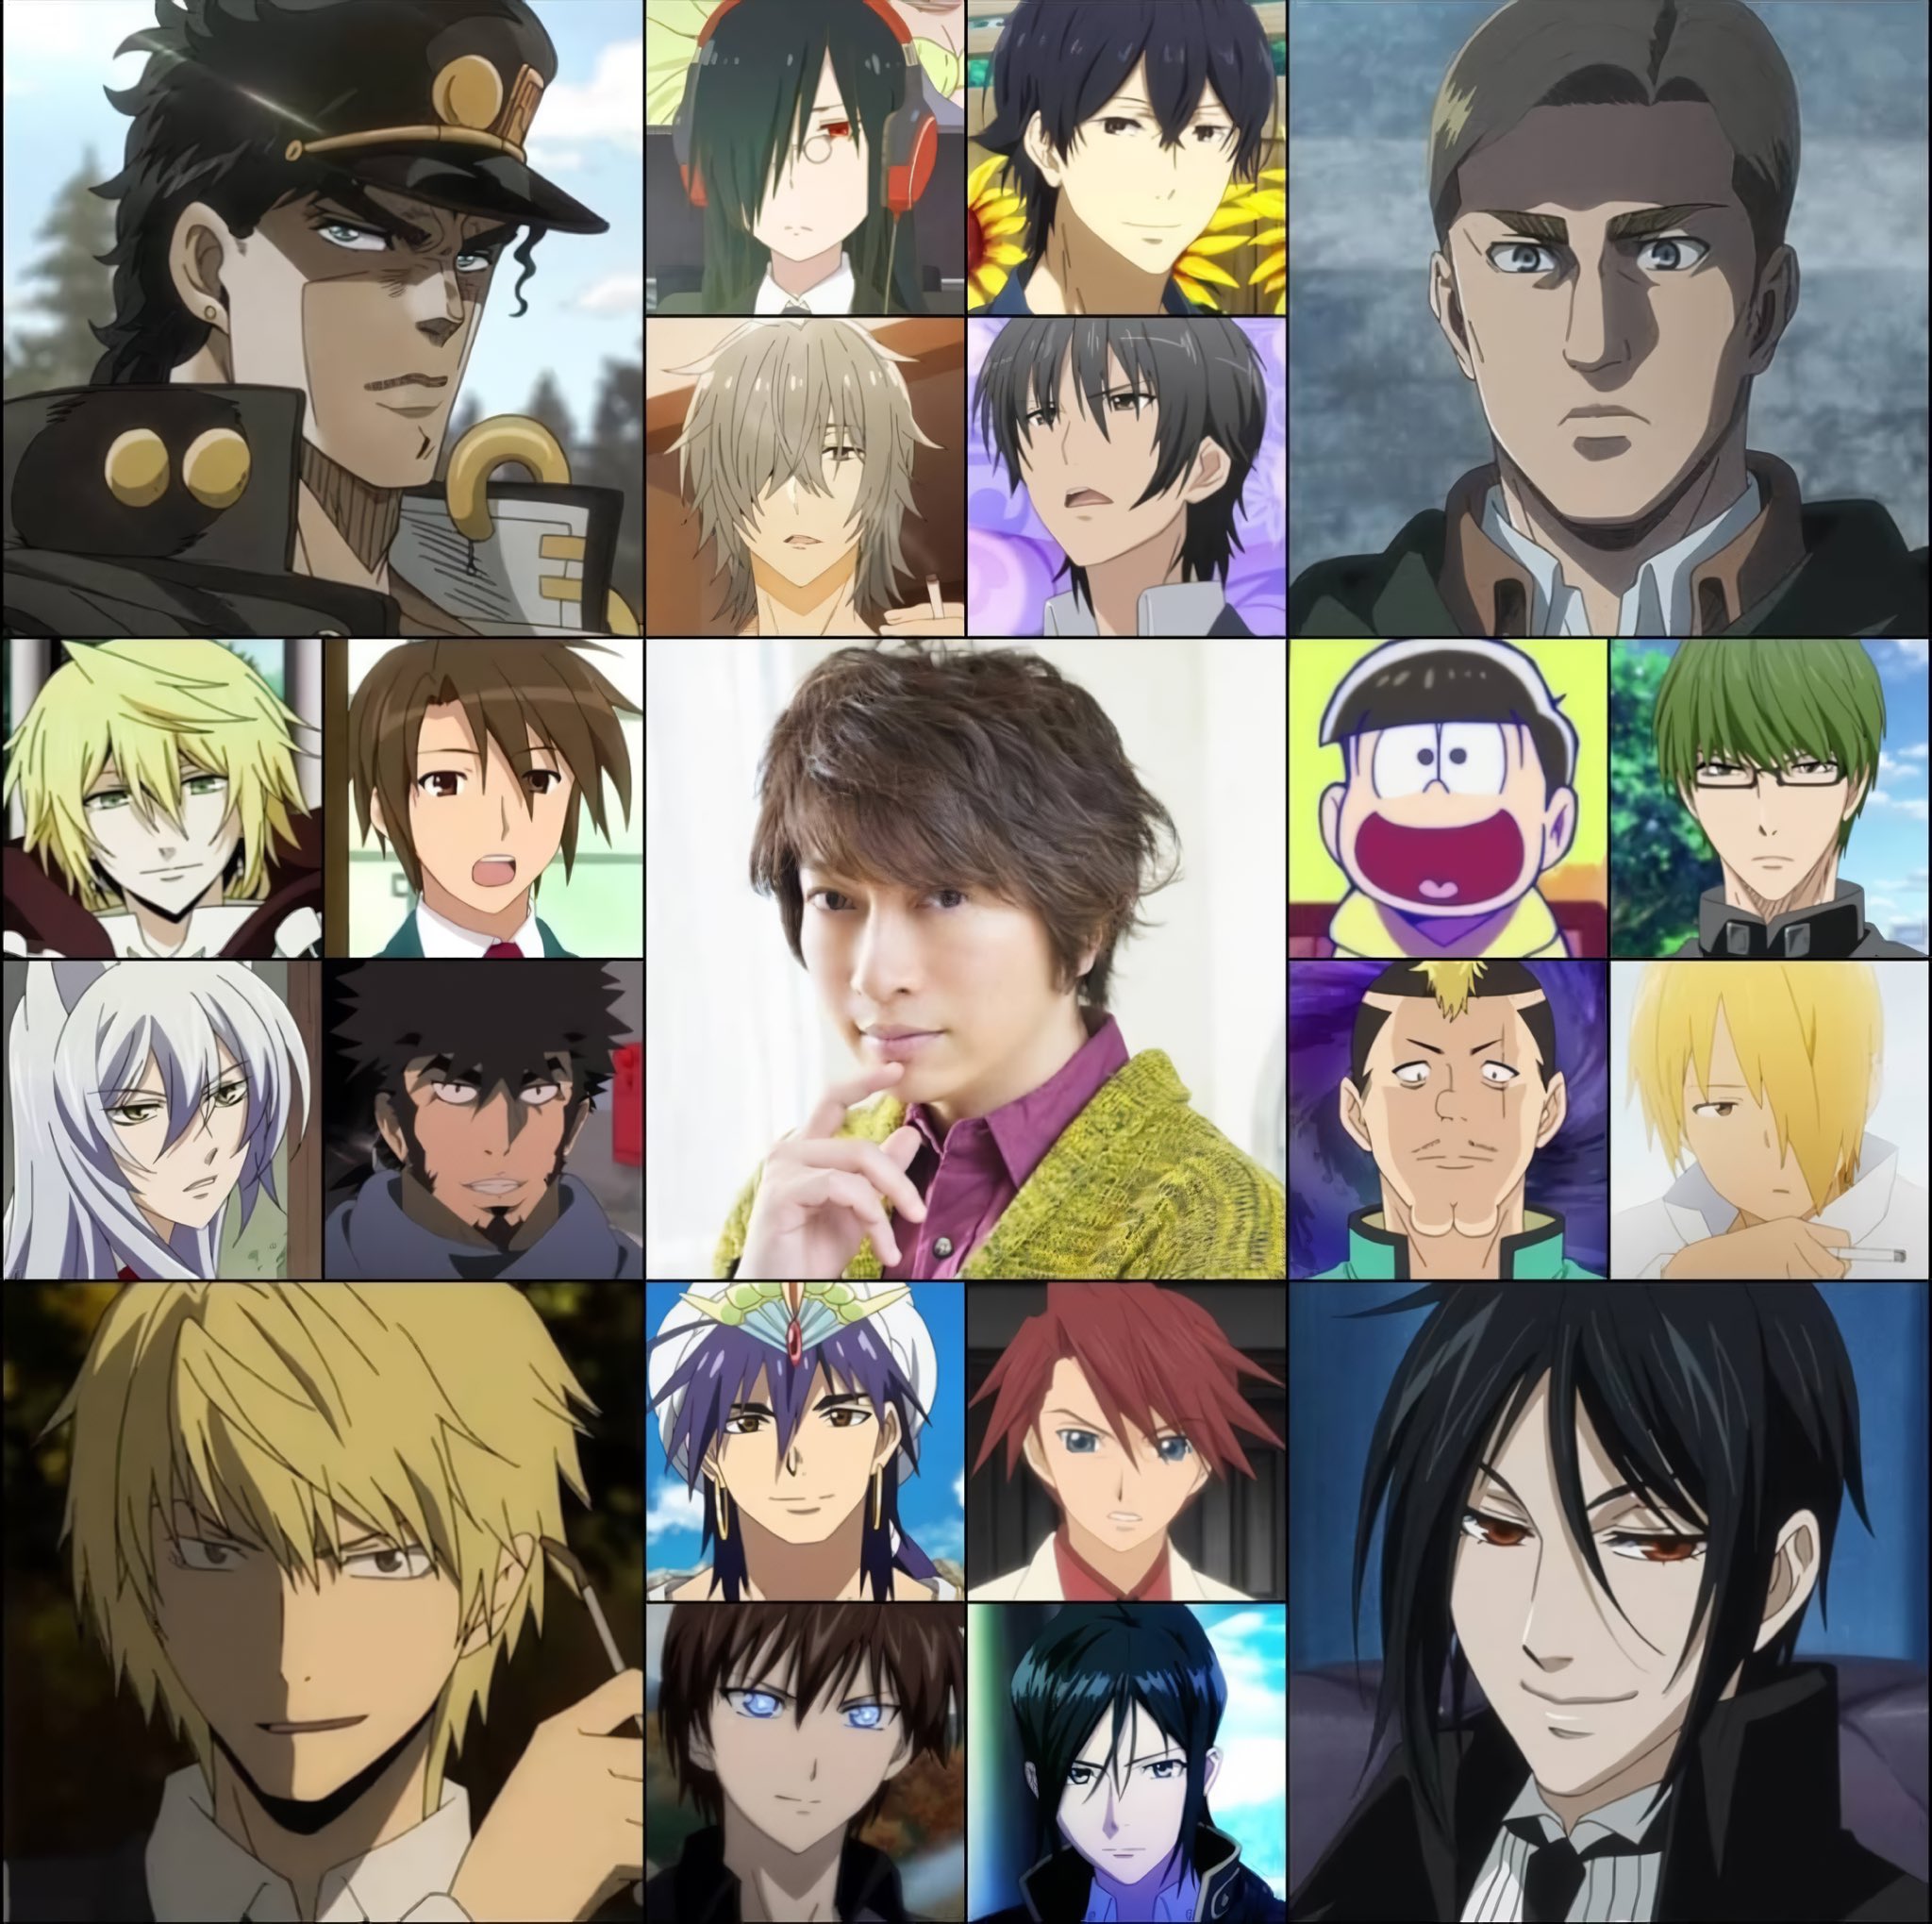 Happy 45th birthday to Daisuke Ono, we wish you all the best in your future! 